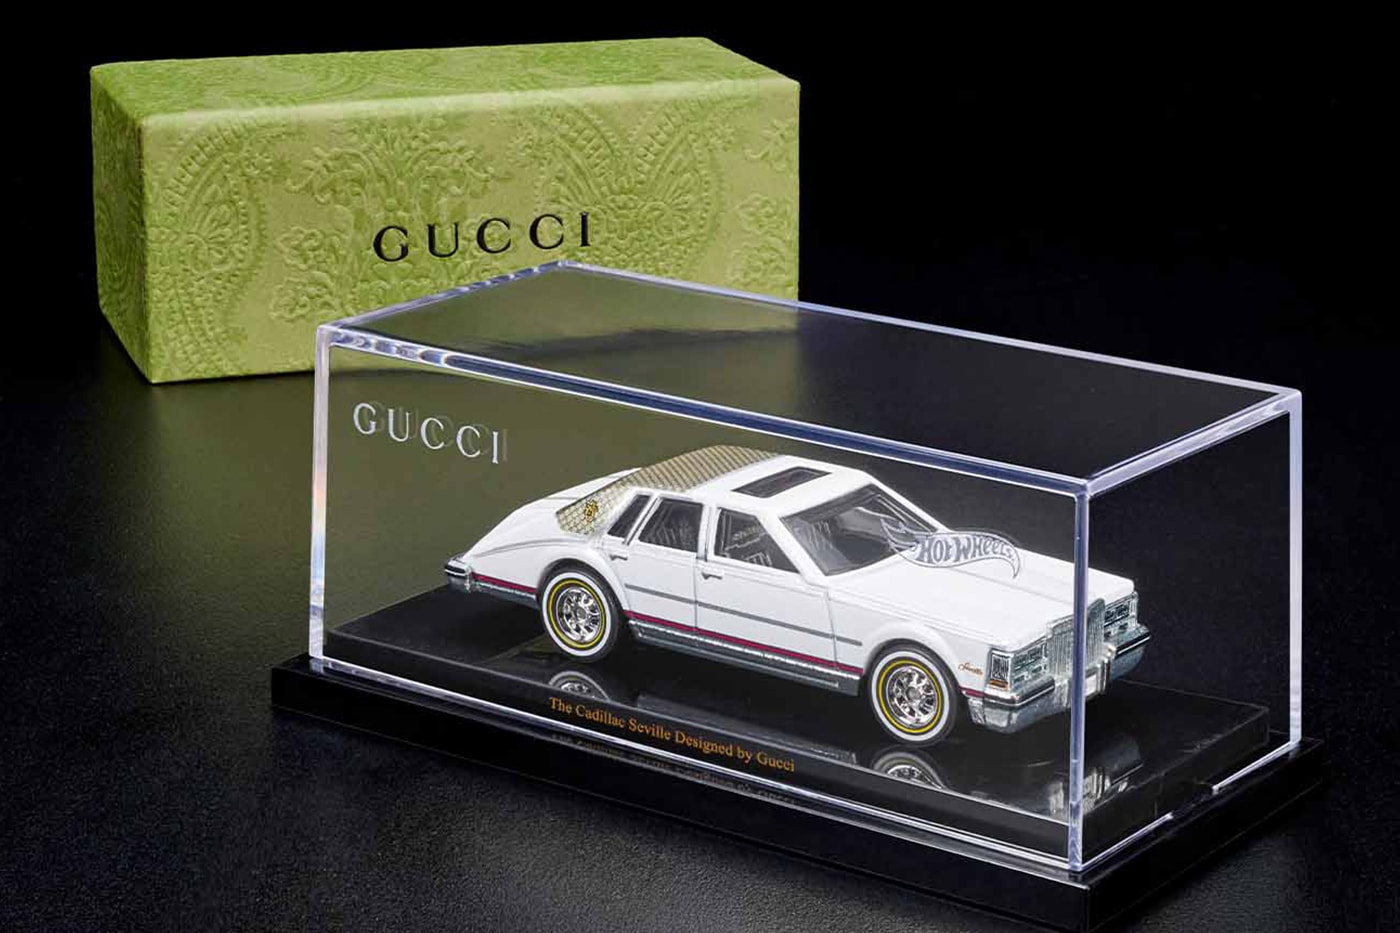 Mattel Creations Inc Hot wheels collectible gucci 100th anniversary limited edition cadillac seville october 18 Italian detroit vinyl top gold radwood custom car 1:6 display case  release info